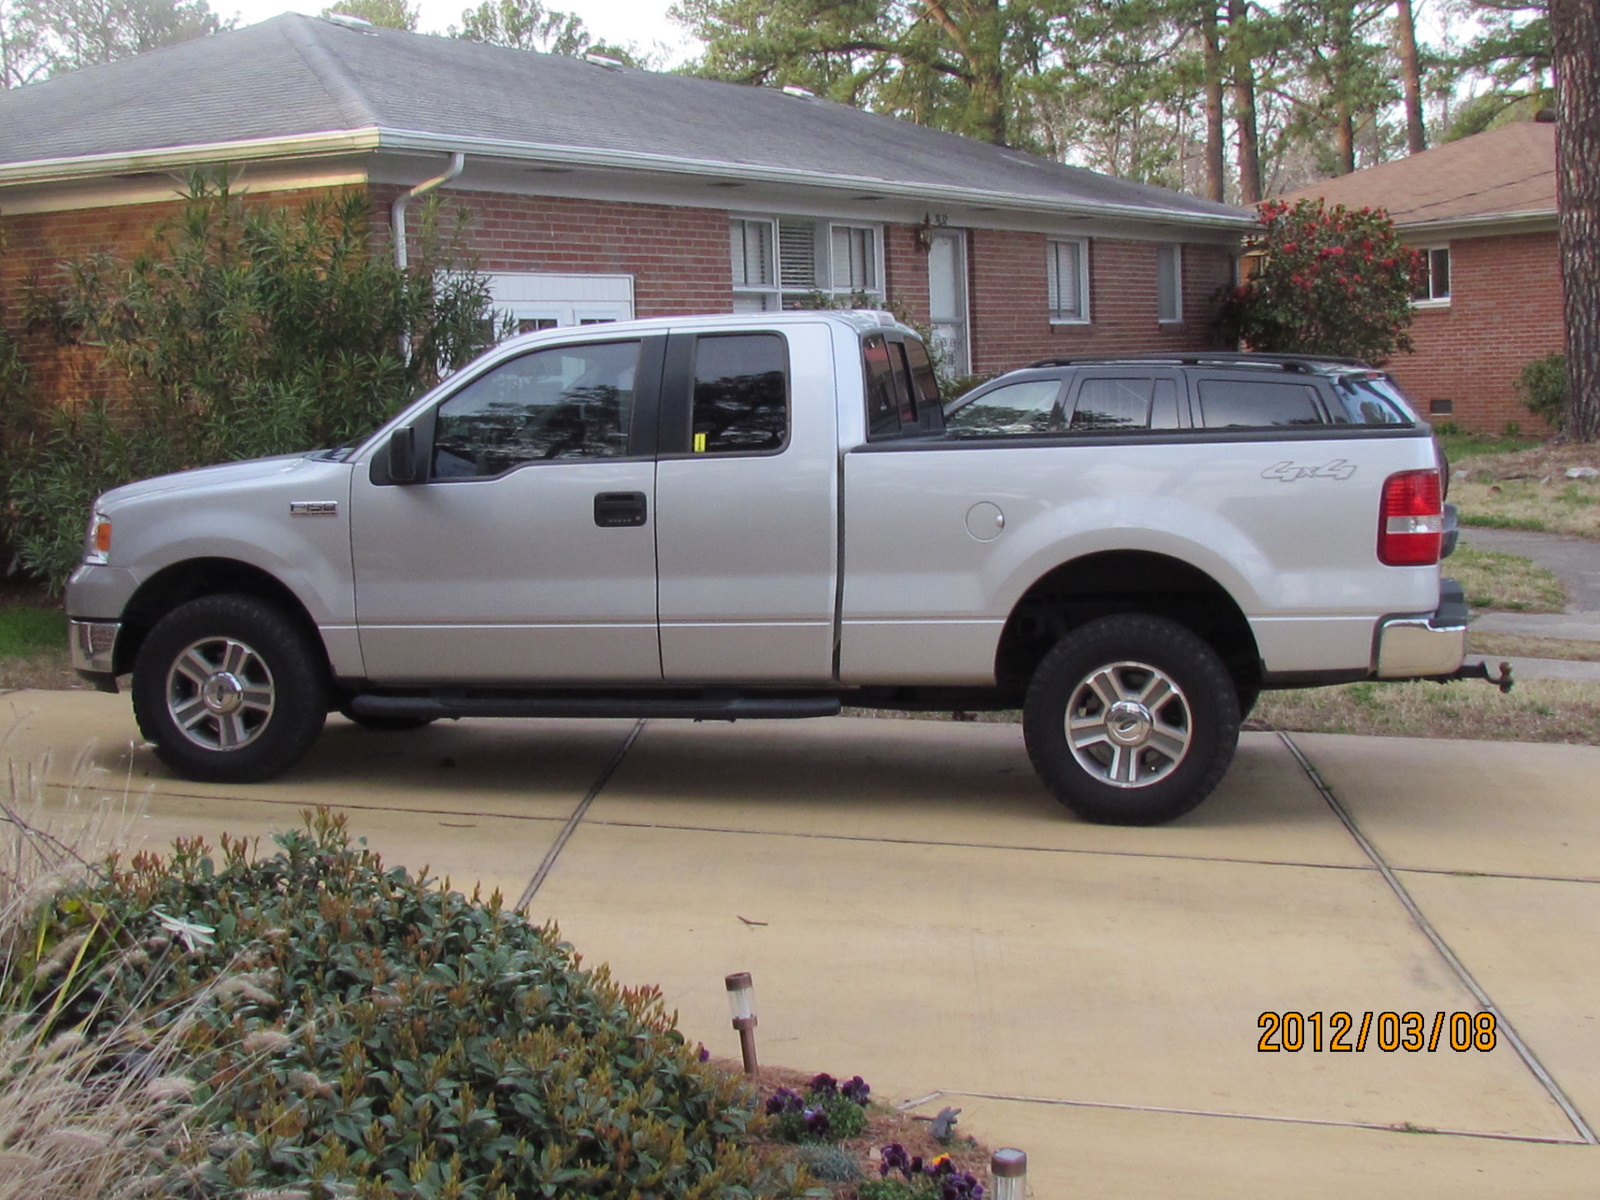 2005 Ford f150 xlt review #2